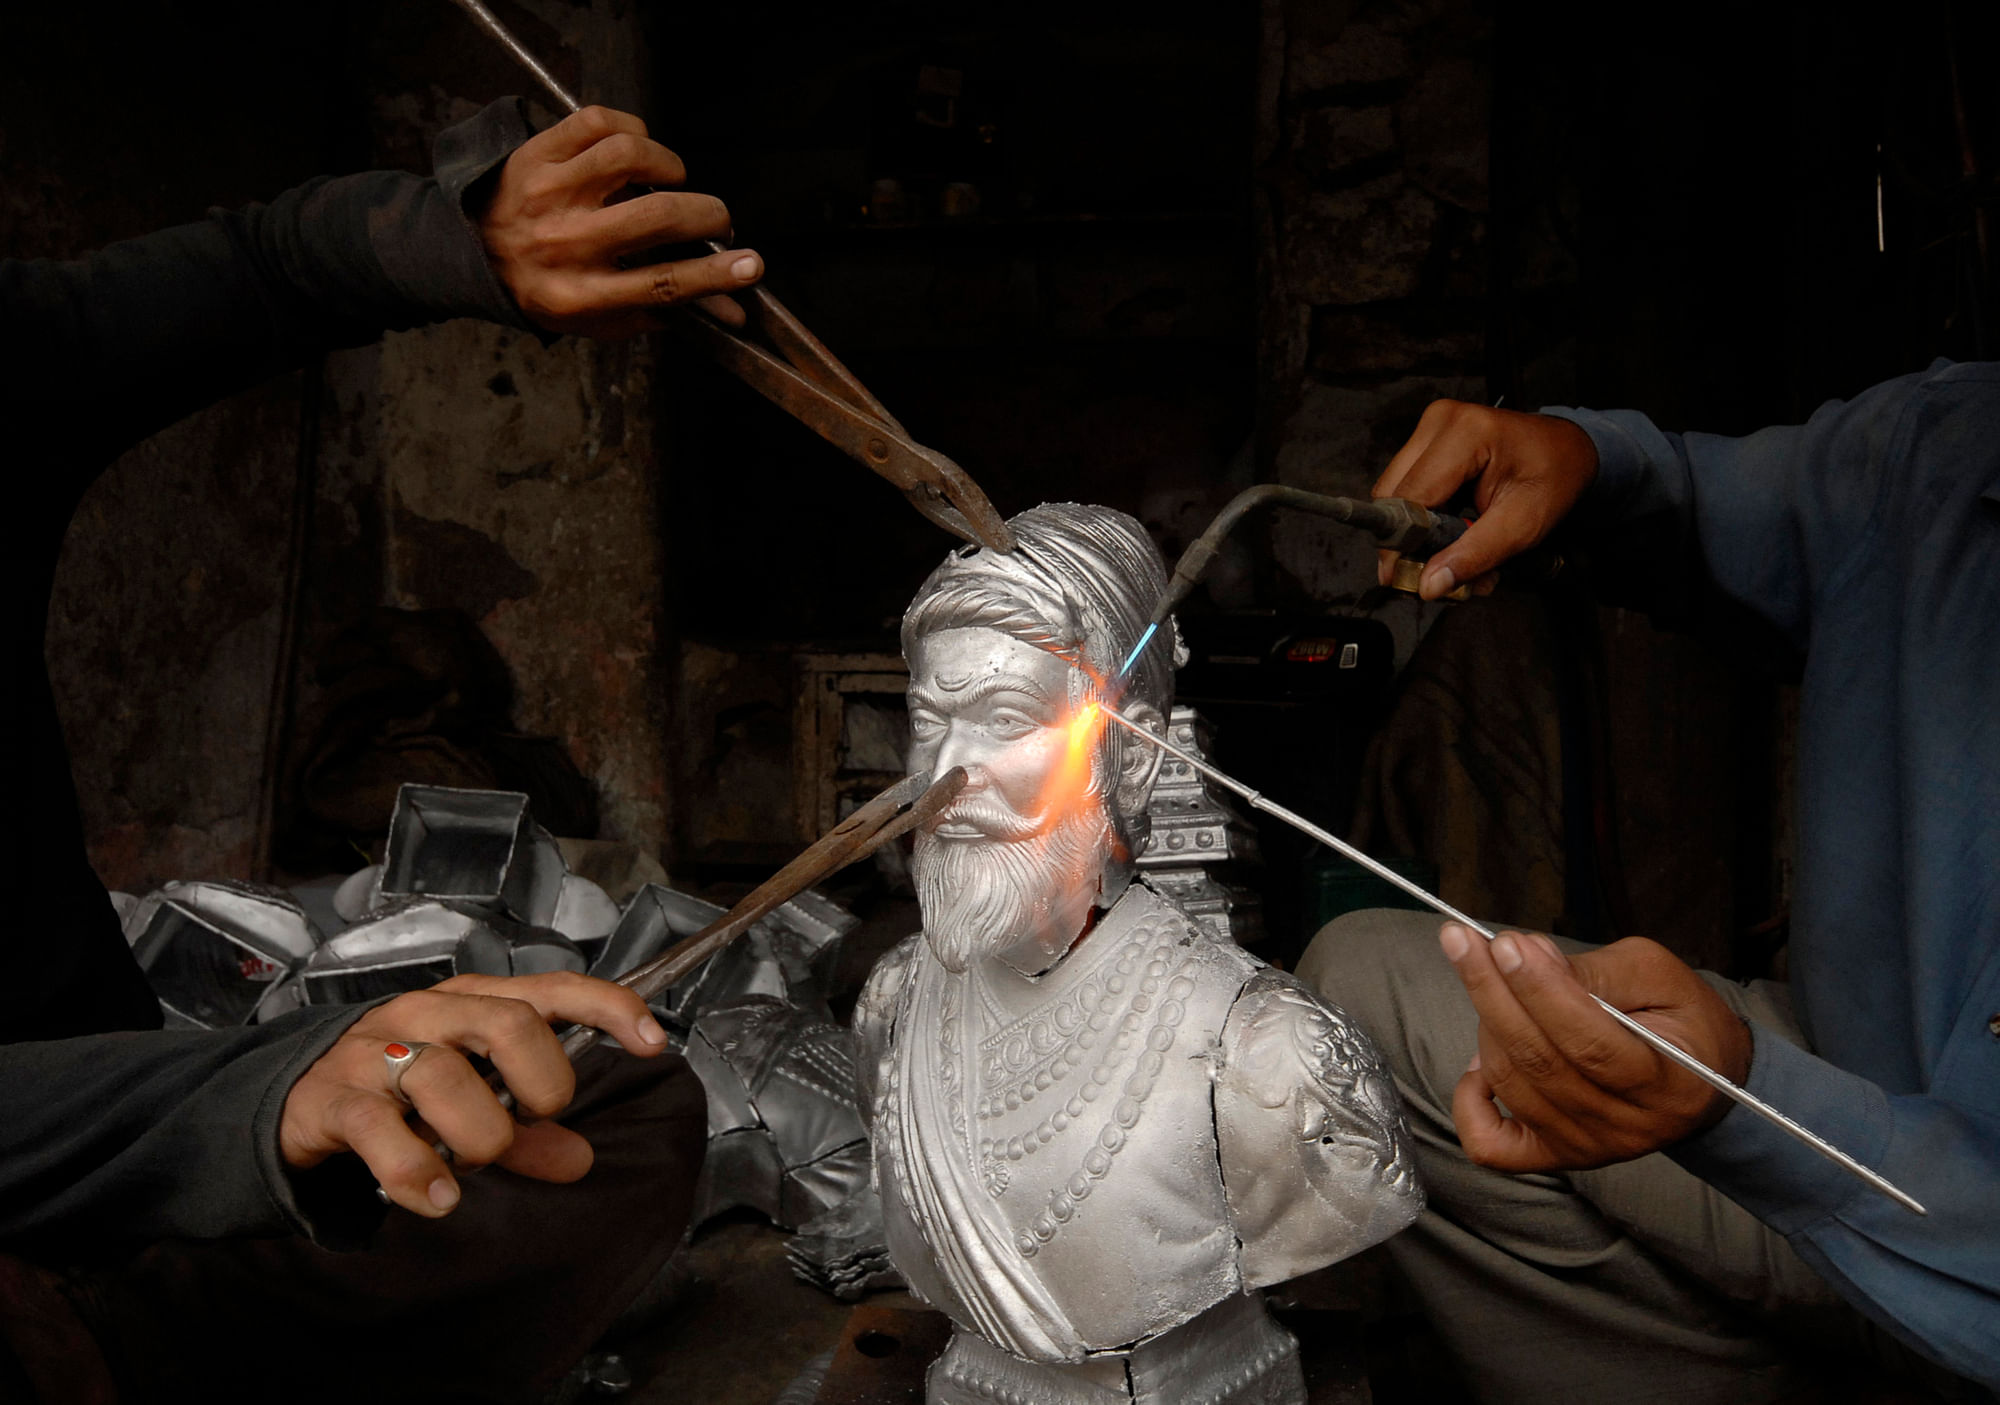 Craftsmen prepare a statue of Chhatrapati Shivaji, revered by many in western India as a Hindu warrior king who fought the Mughal empire and annexed land from its Muslim rulers in the 17th century, at a metal casting workshop in the southern Indian city of Hyderabad July 1, 2008